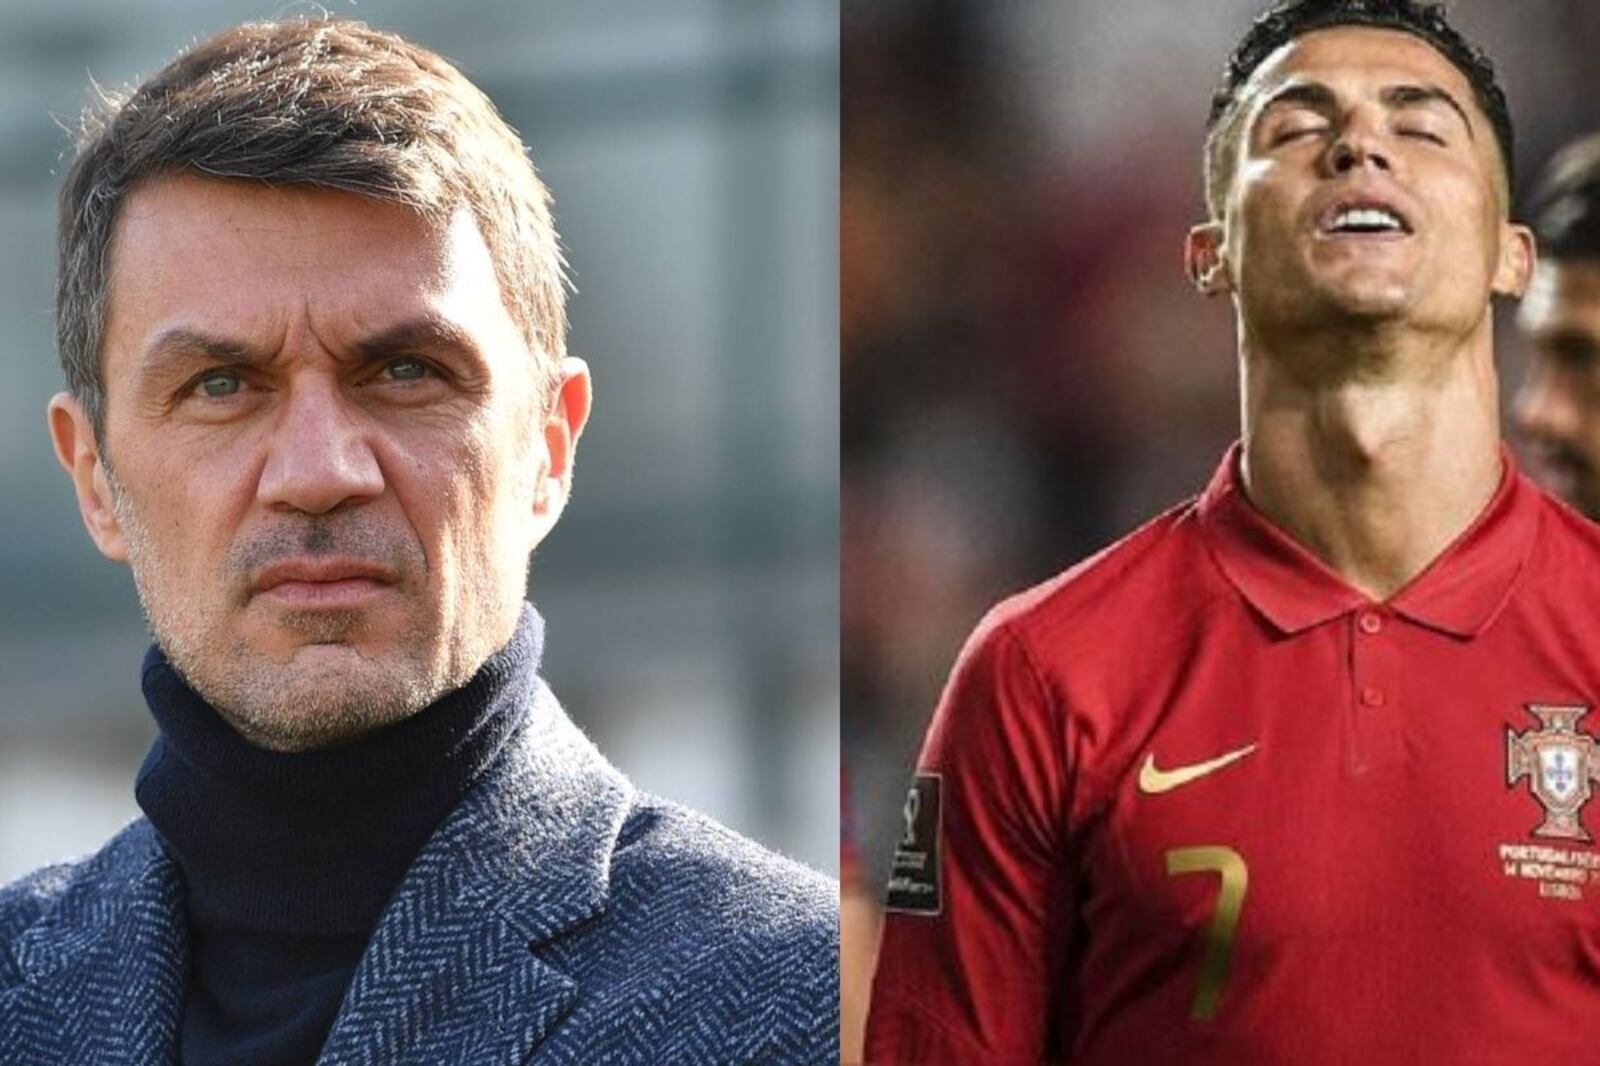 Paolo Maldini left Cristiano Ronaldo out of the best players in history for this reason